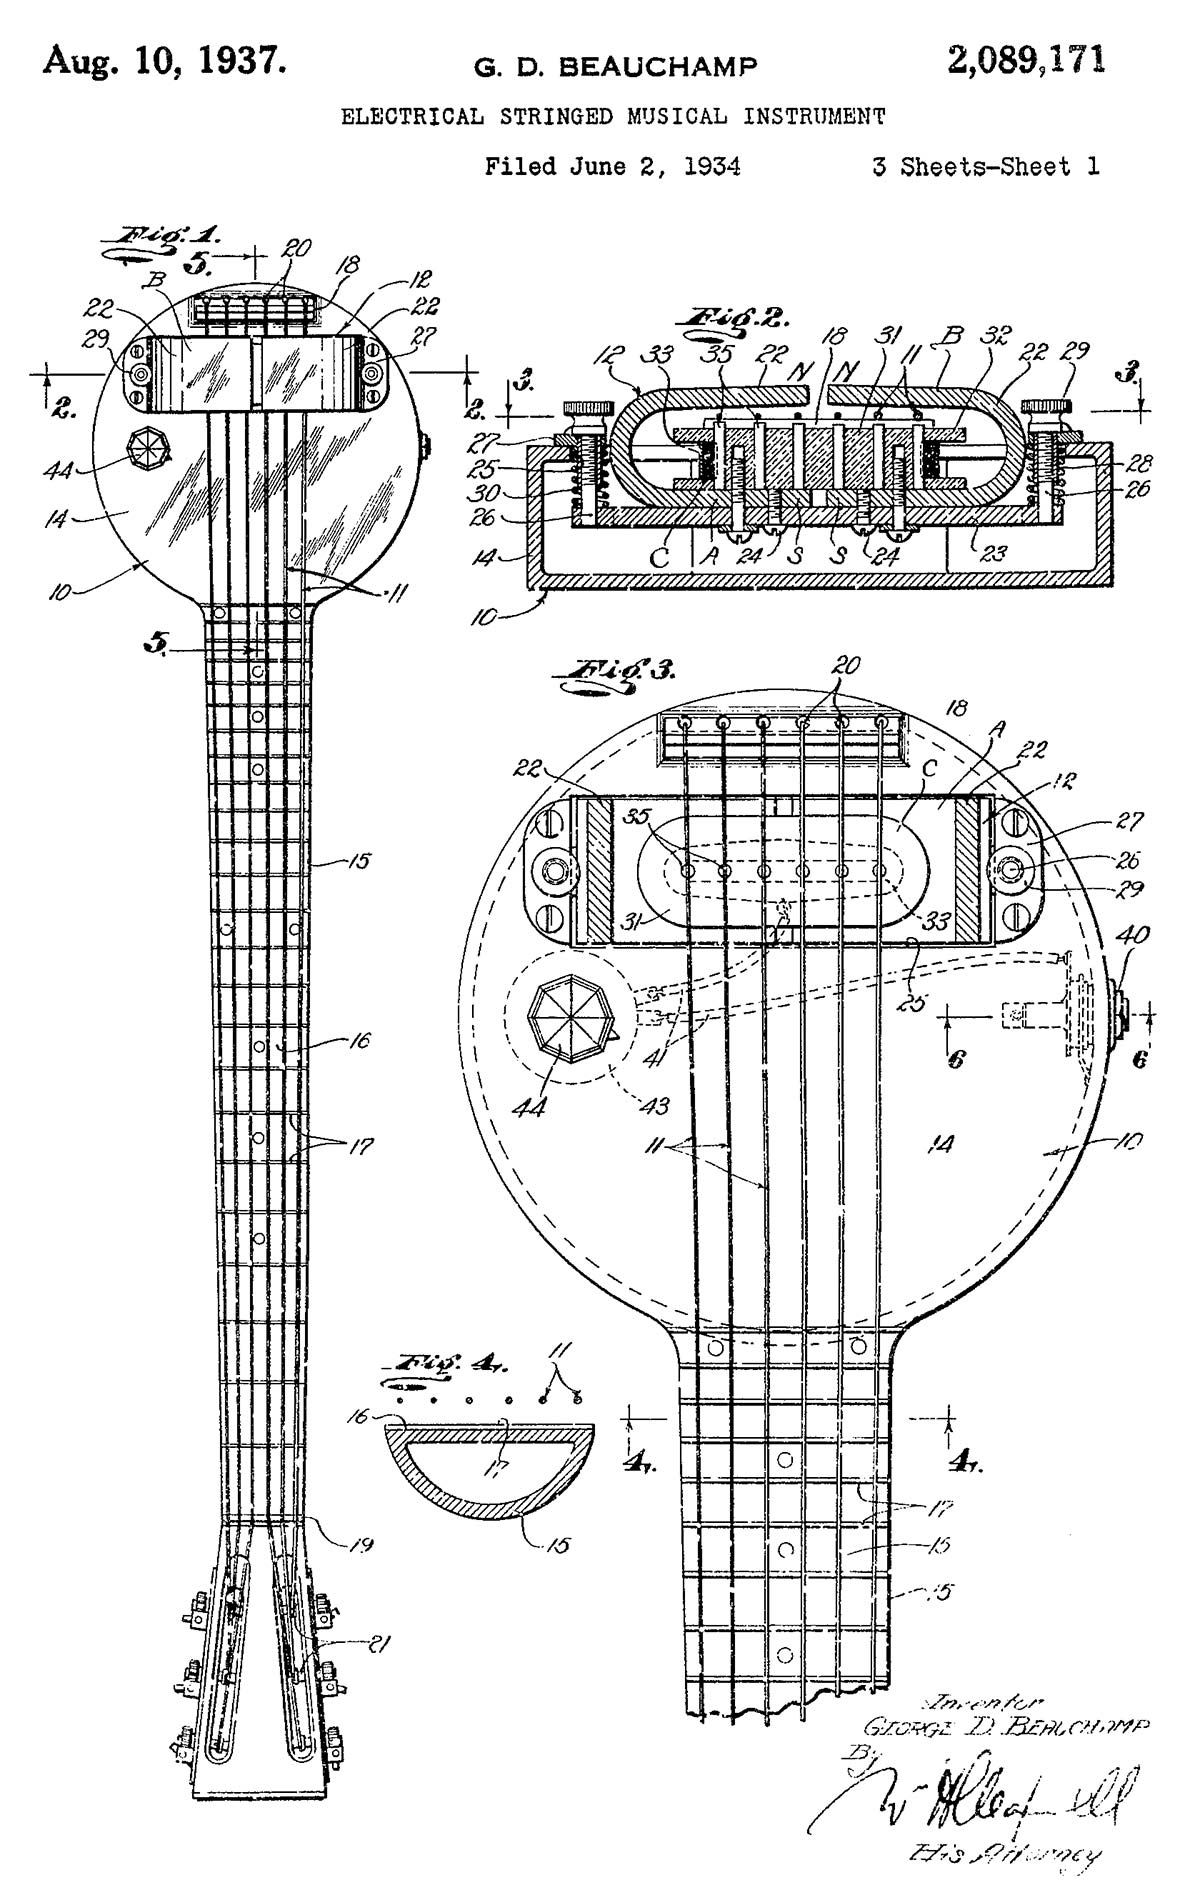 Patent for the frying-pan guitar with the pick-up developed by Beauchamp.